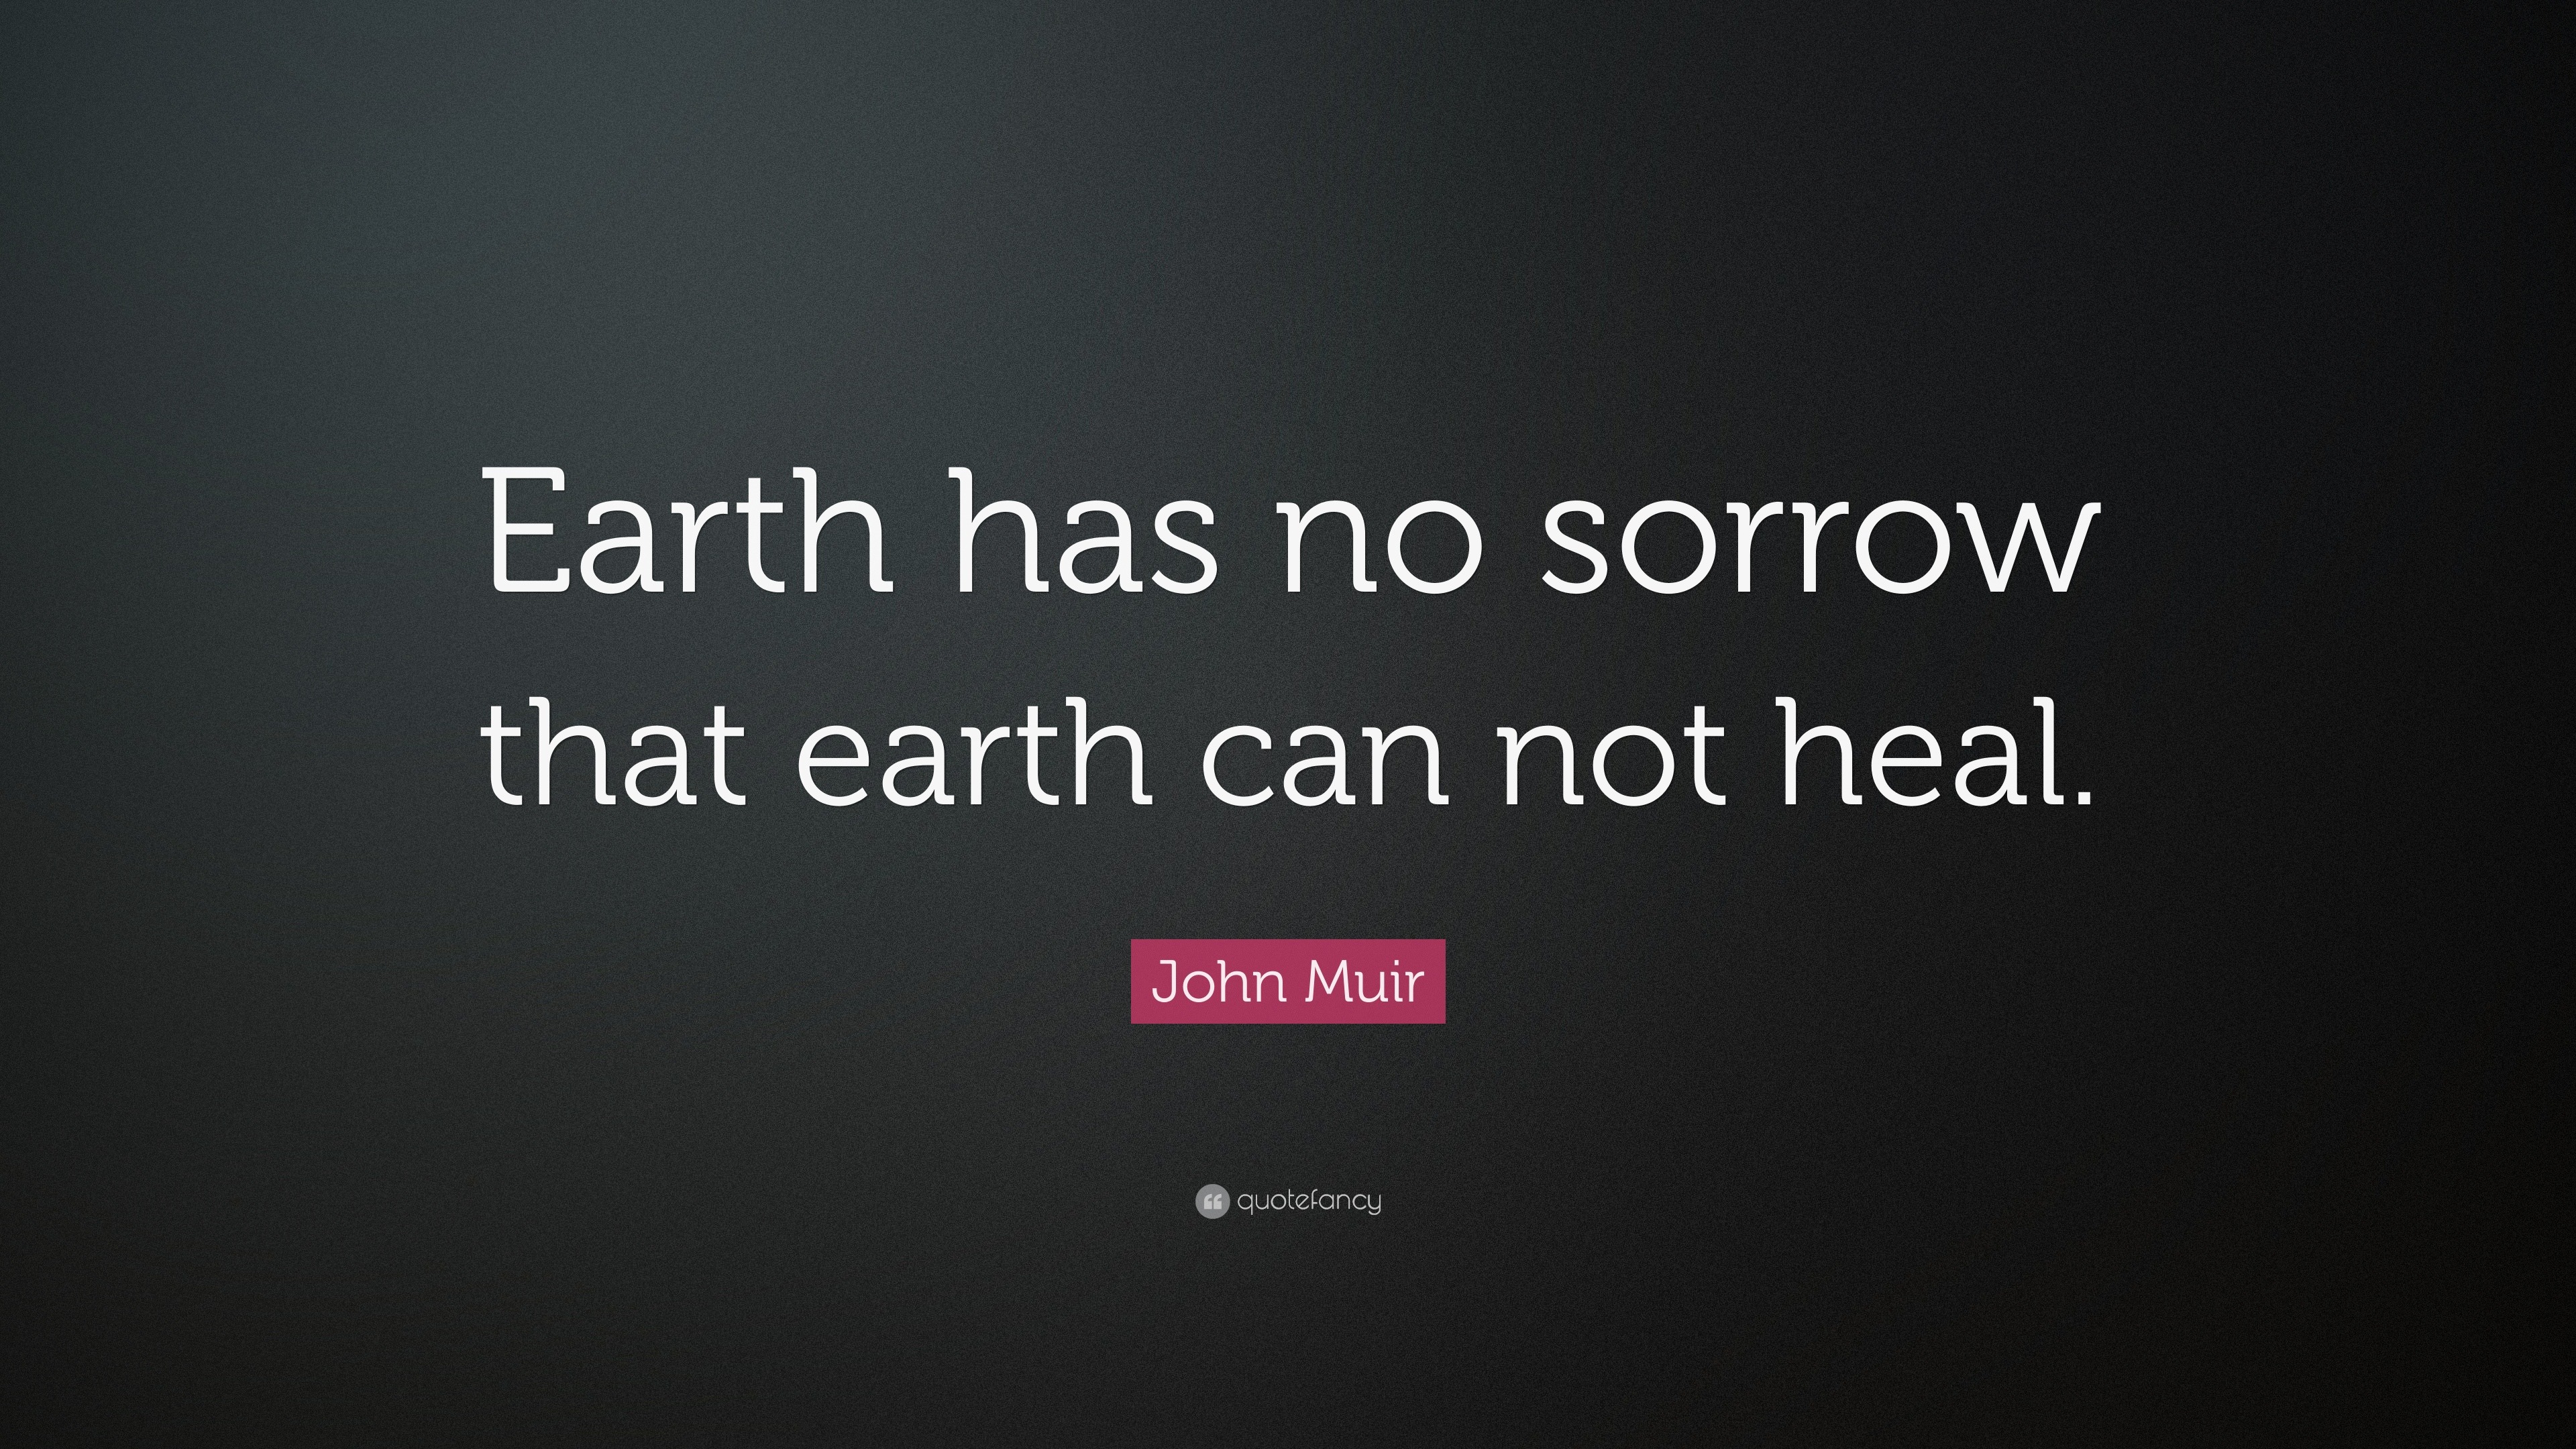 Download John Muir Quote: "Earth has no sorrow that earth can not ...